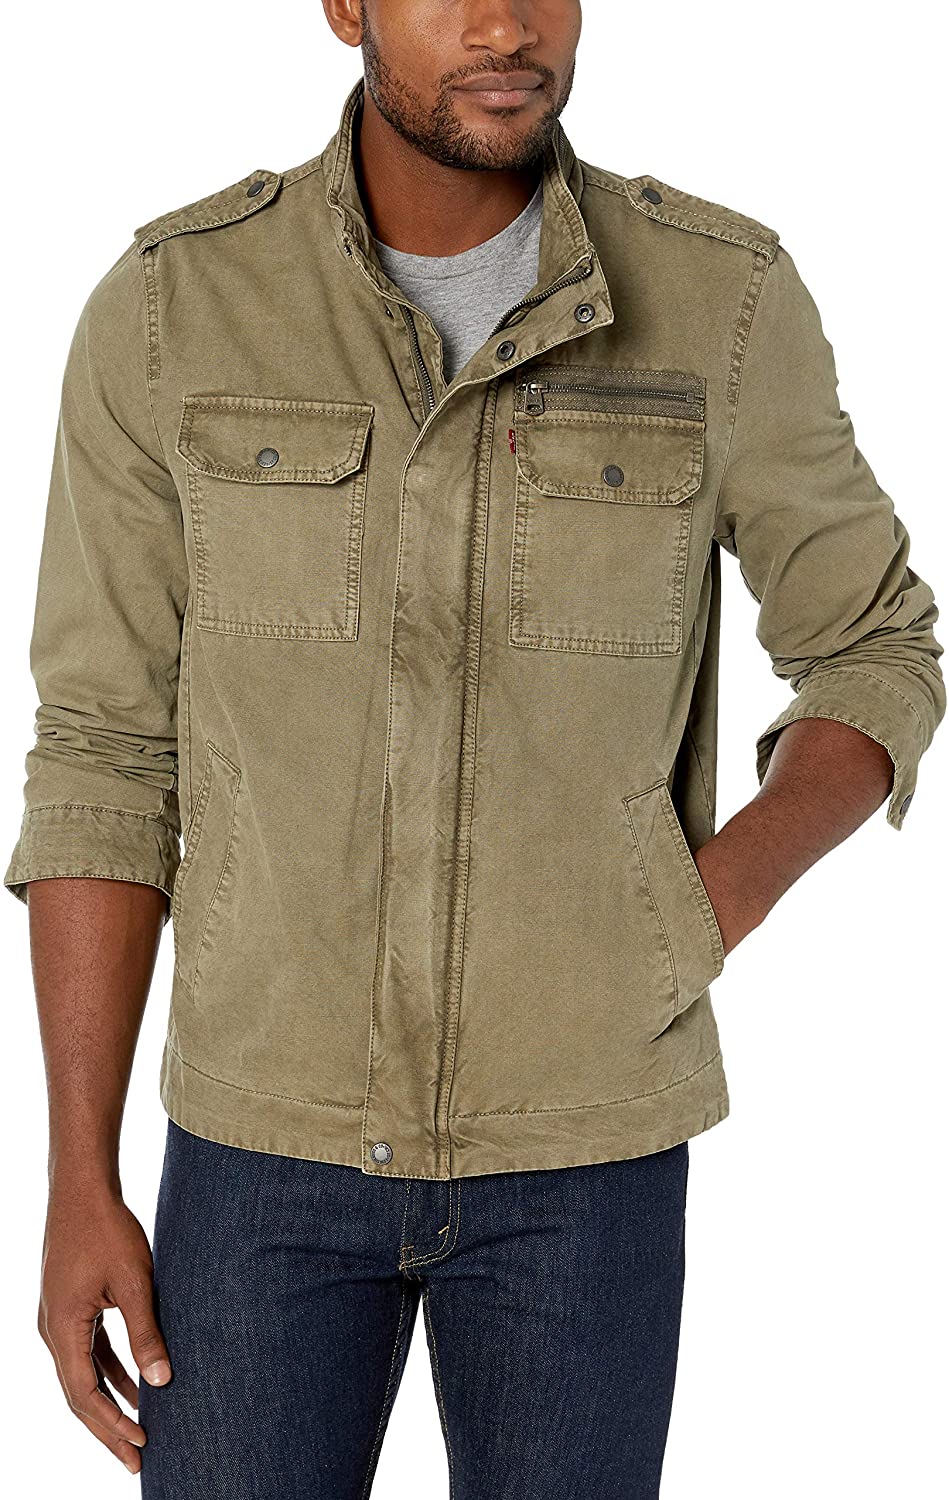 Levi's Men's Washed Cotton Two Pocket Military Jacket Big & Tall